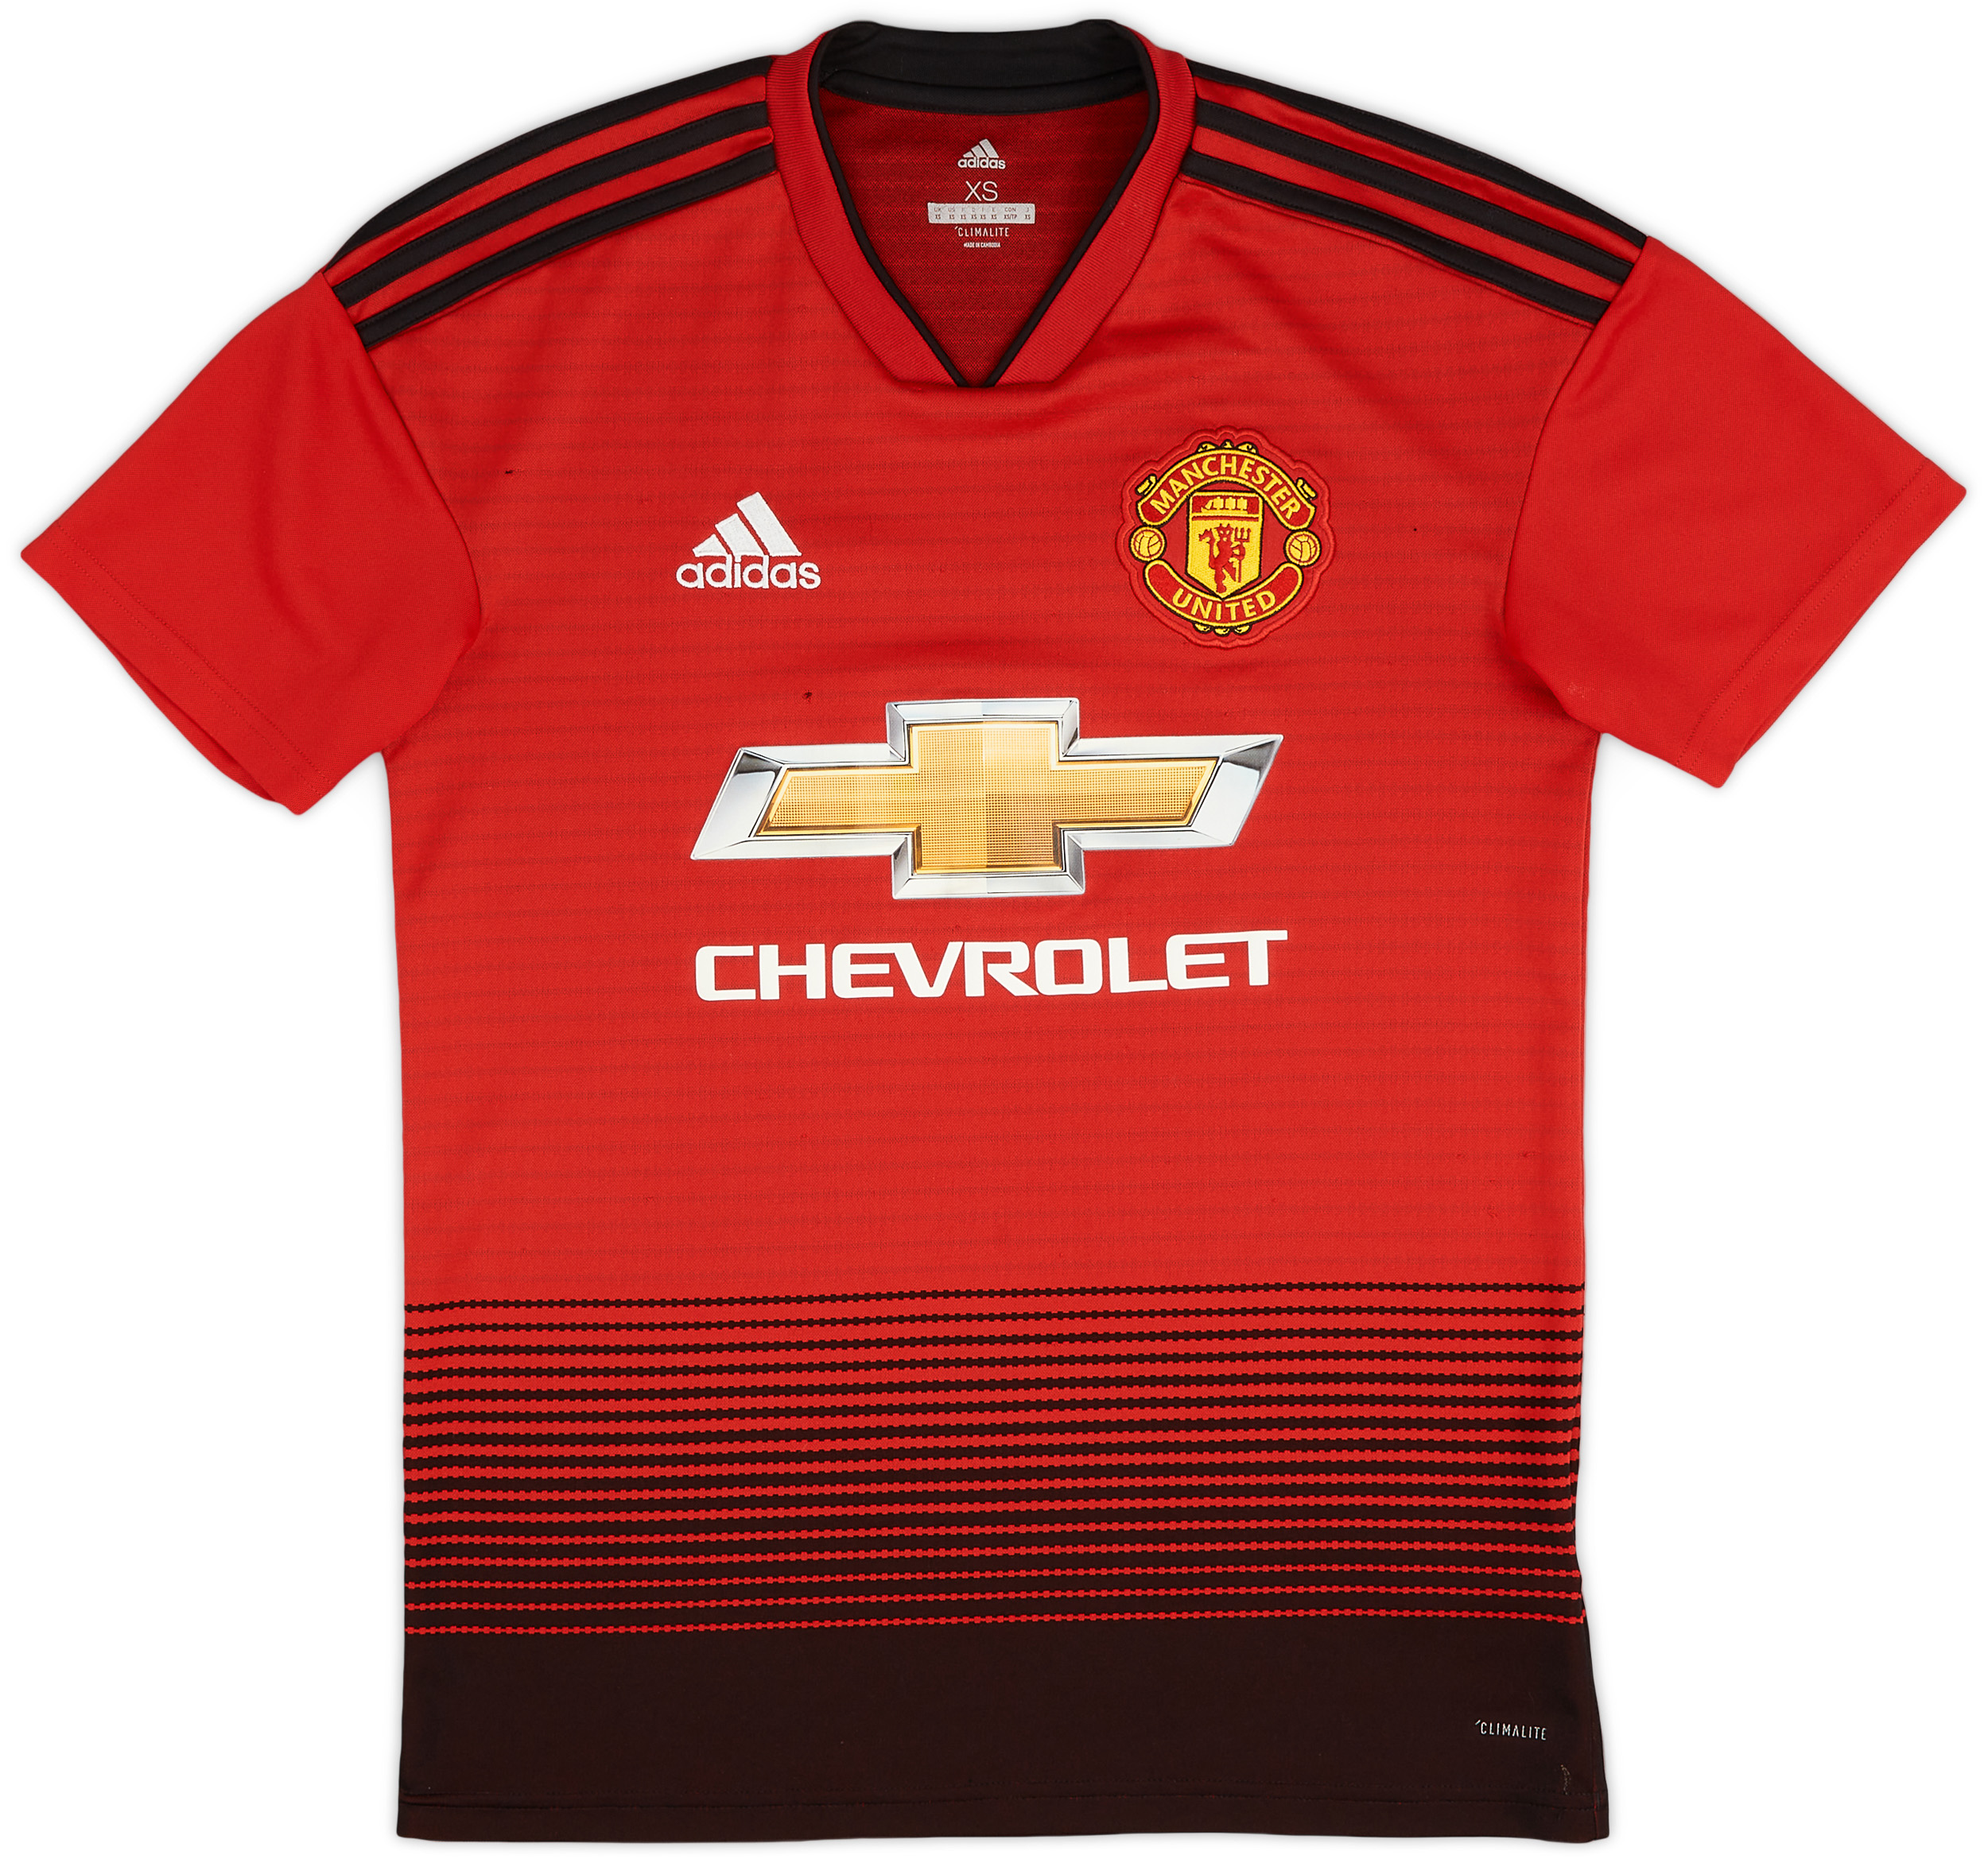 2018-19 Manchester United Home Shirt - 6/10 - ()